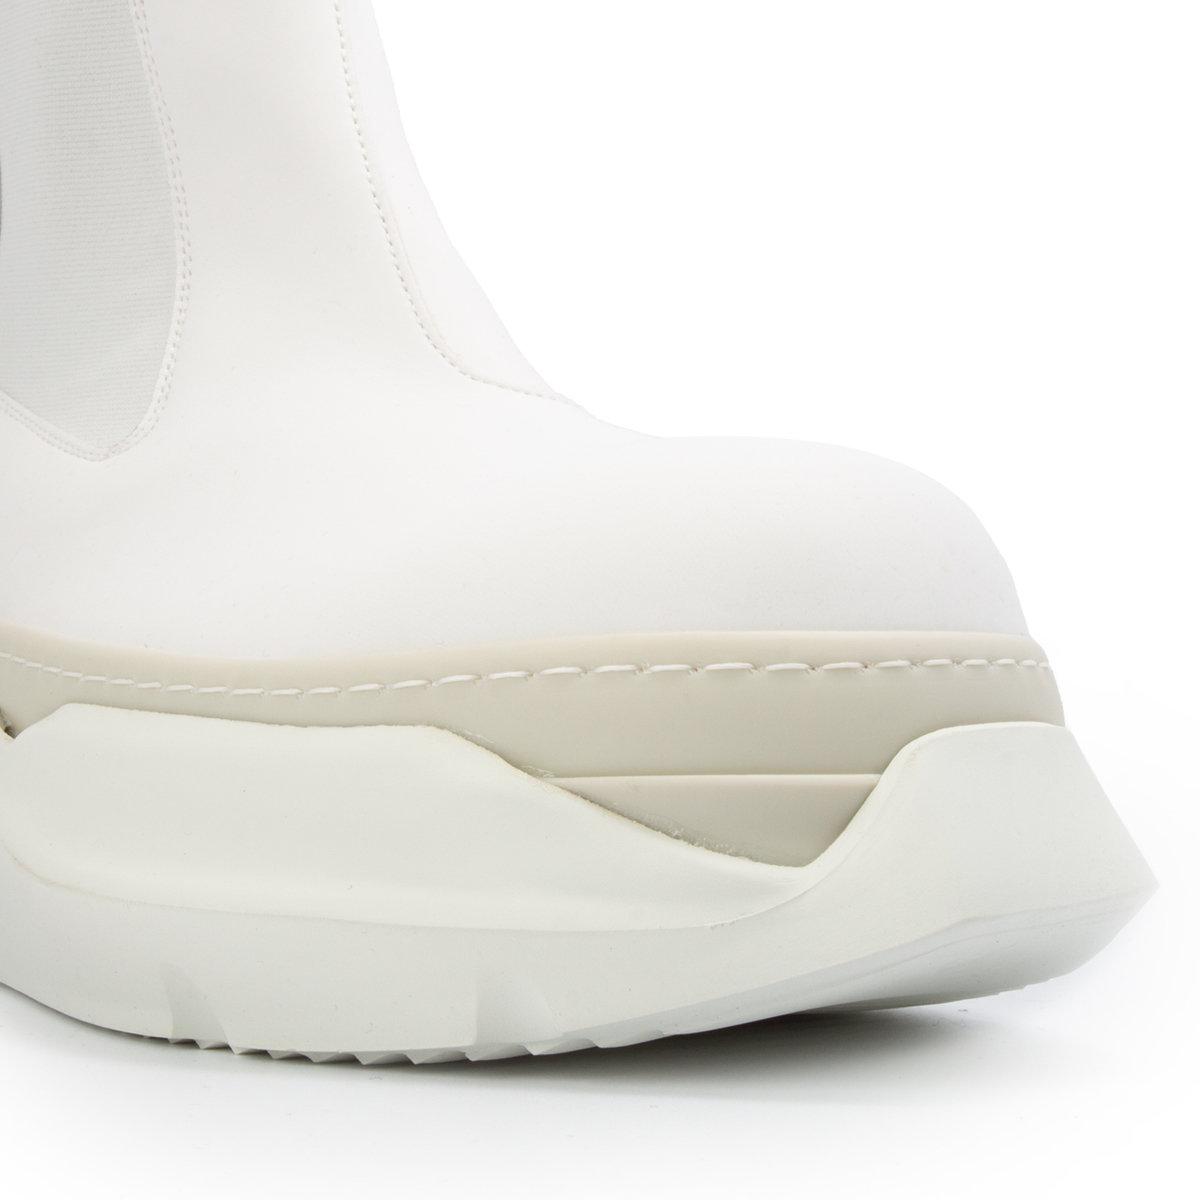 Rick Owens Drkshdw Leather Abstract Beetle Boots Chalk White for Men - Lyst